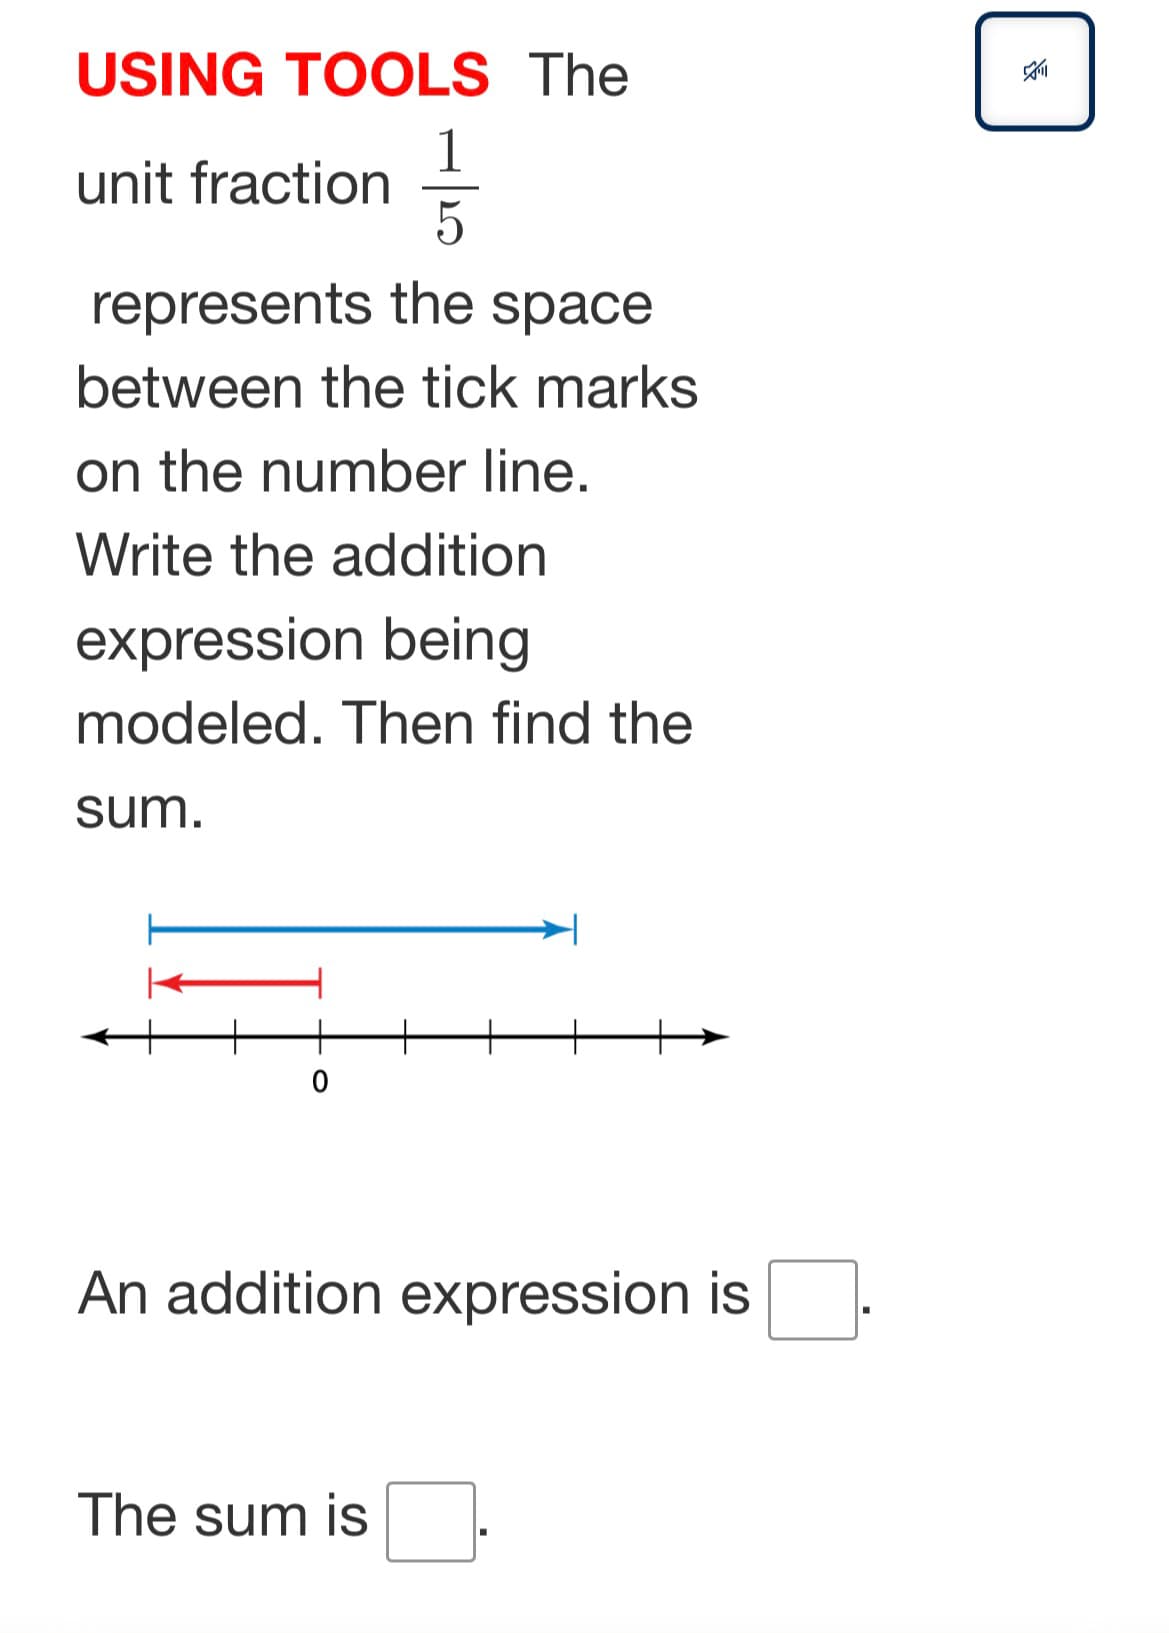 USING TOOLS The
unit fraction=
represents the space
between the tick marks
on the number line.
Write the addition
expression being
modeled. Then find the
sum.
An addition expression is
The sum is
這